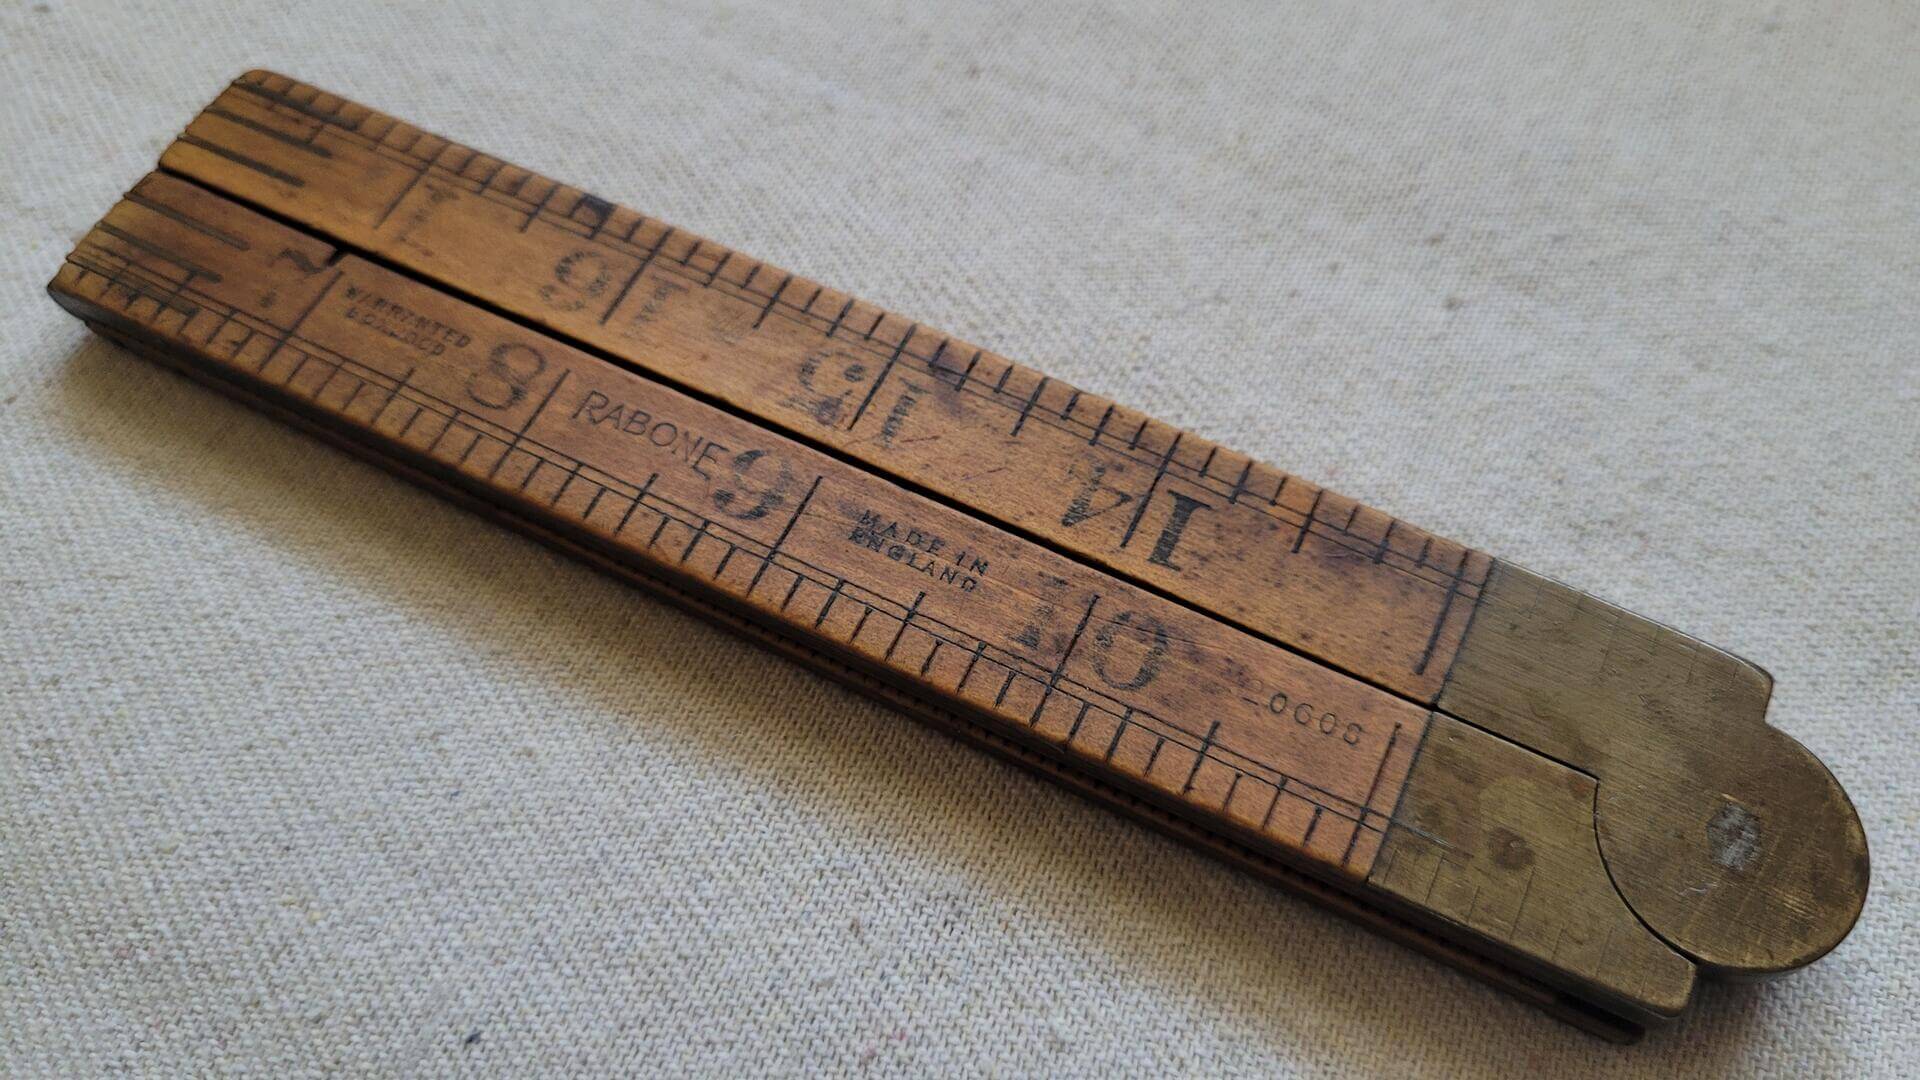 rabone-no-0608-warranted-boxwood-and-brass-folding-ruler-vintage-antique-made-in-england-collectible-yardstick-measuring-tool-makers-model-etching